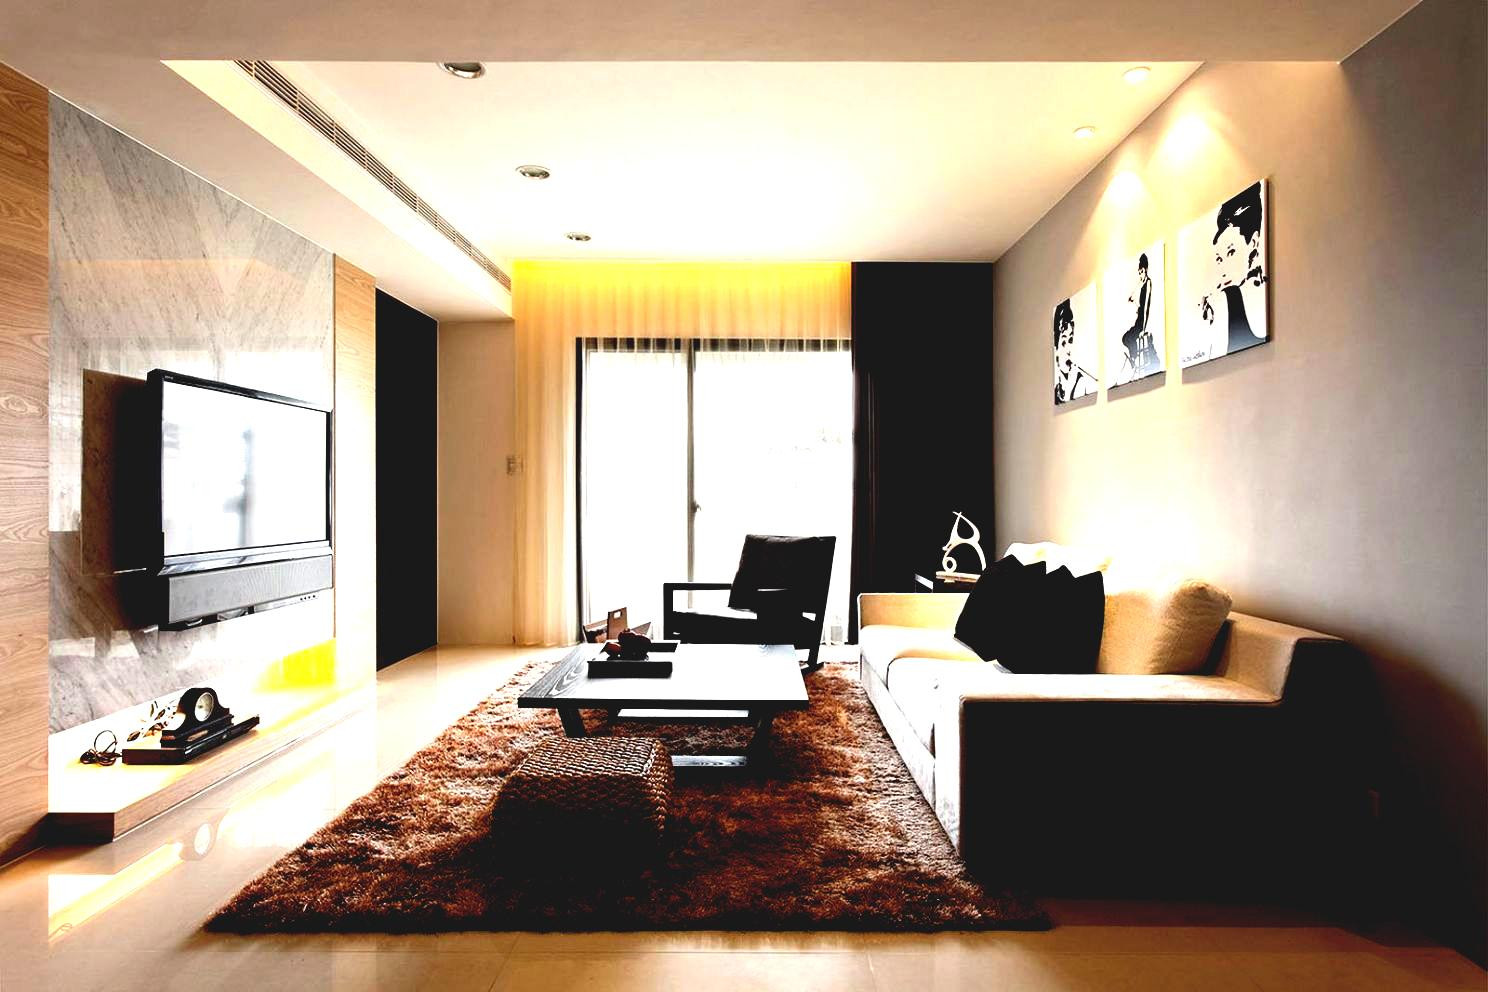 Simple Modern Living Room
 Simple design ideas for small living room